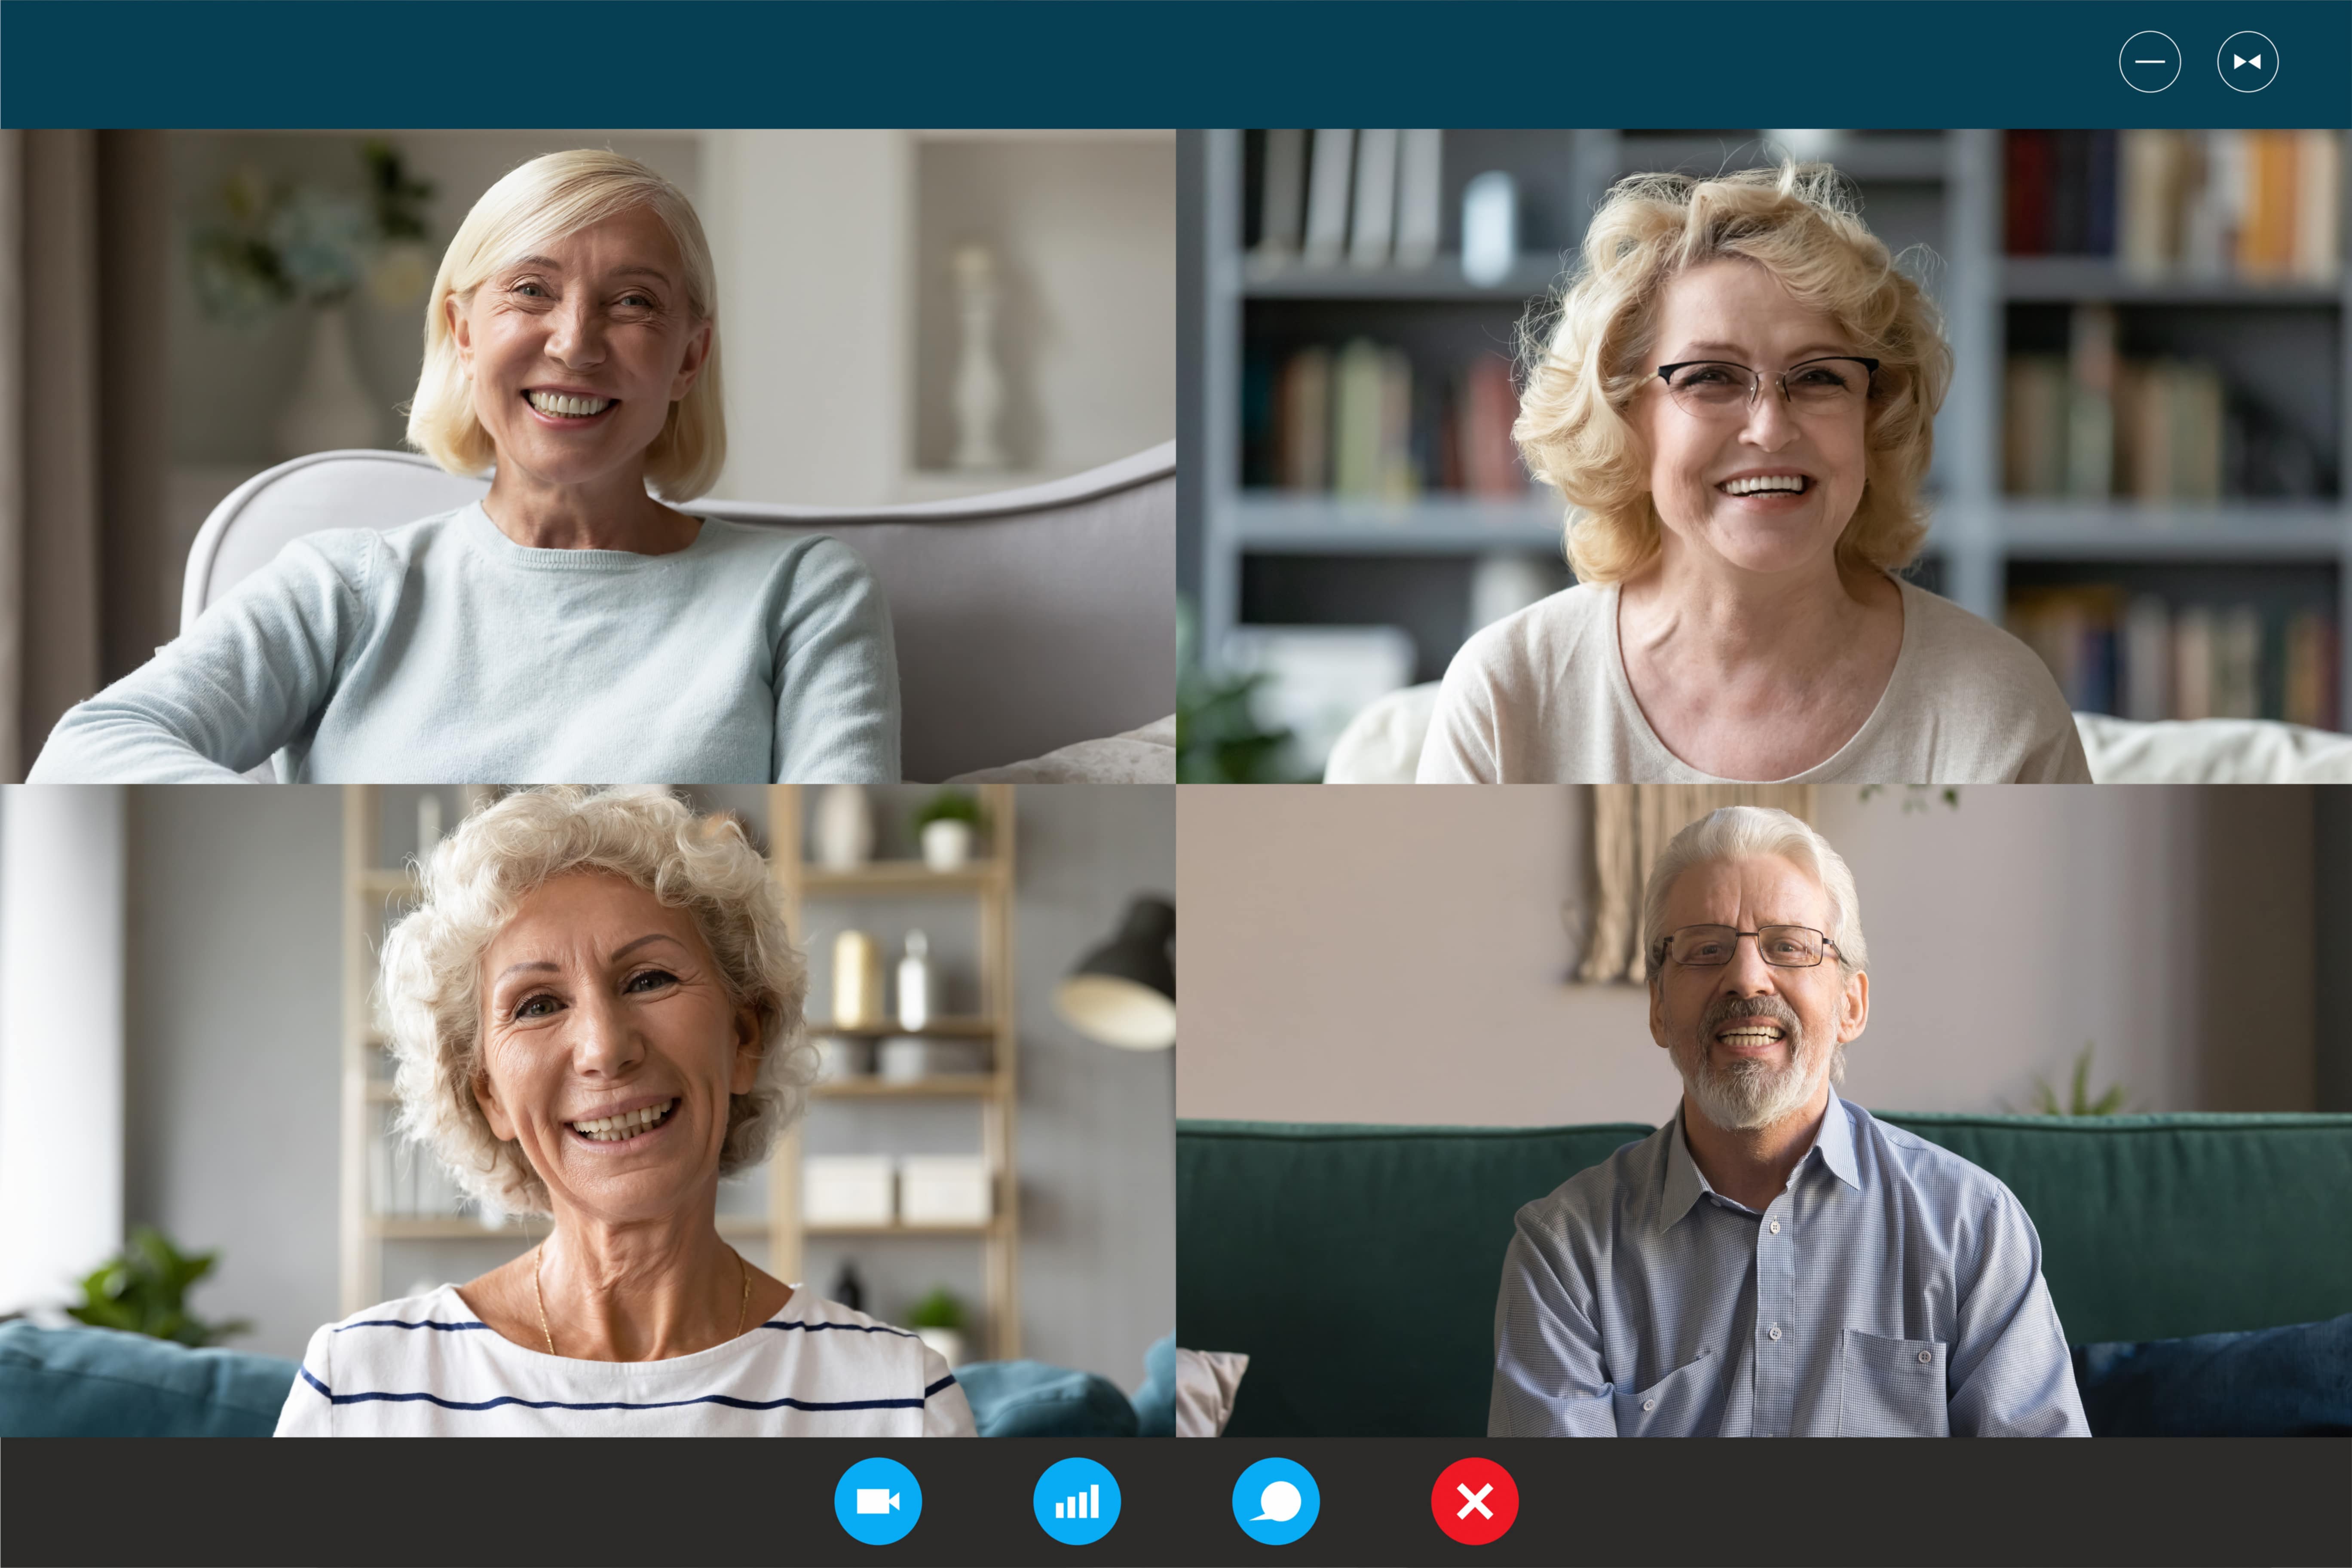 Four Caucasian middle-aged 50s people involved at group video call conference, laptop webcam head shot portraits view. Older generation and modern application technology easy convenient usage concept